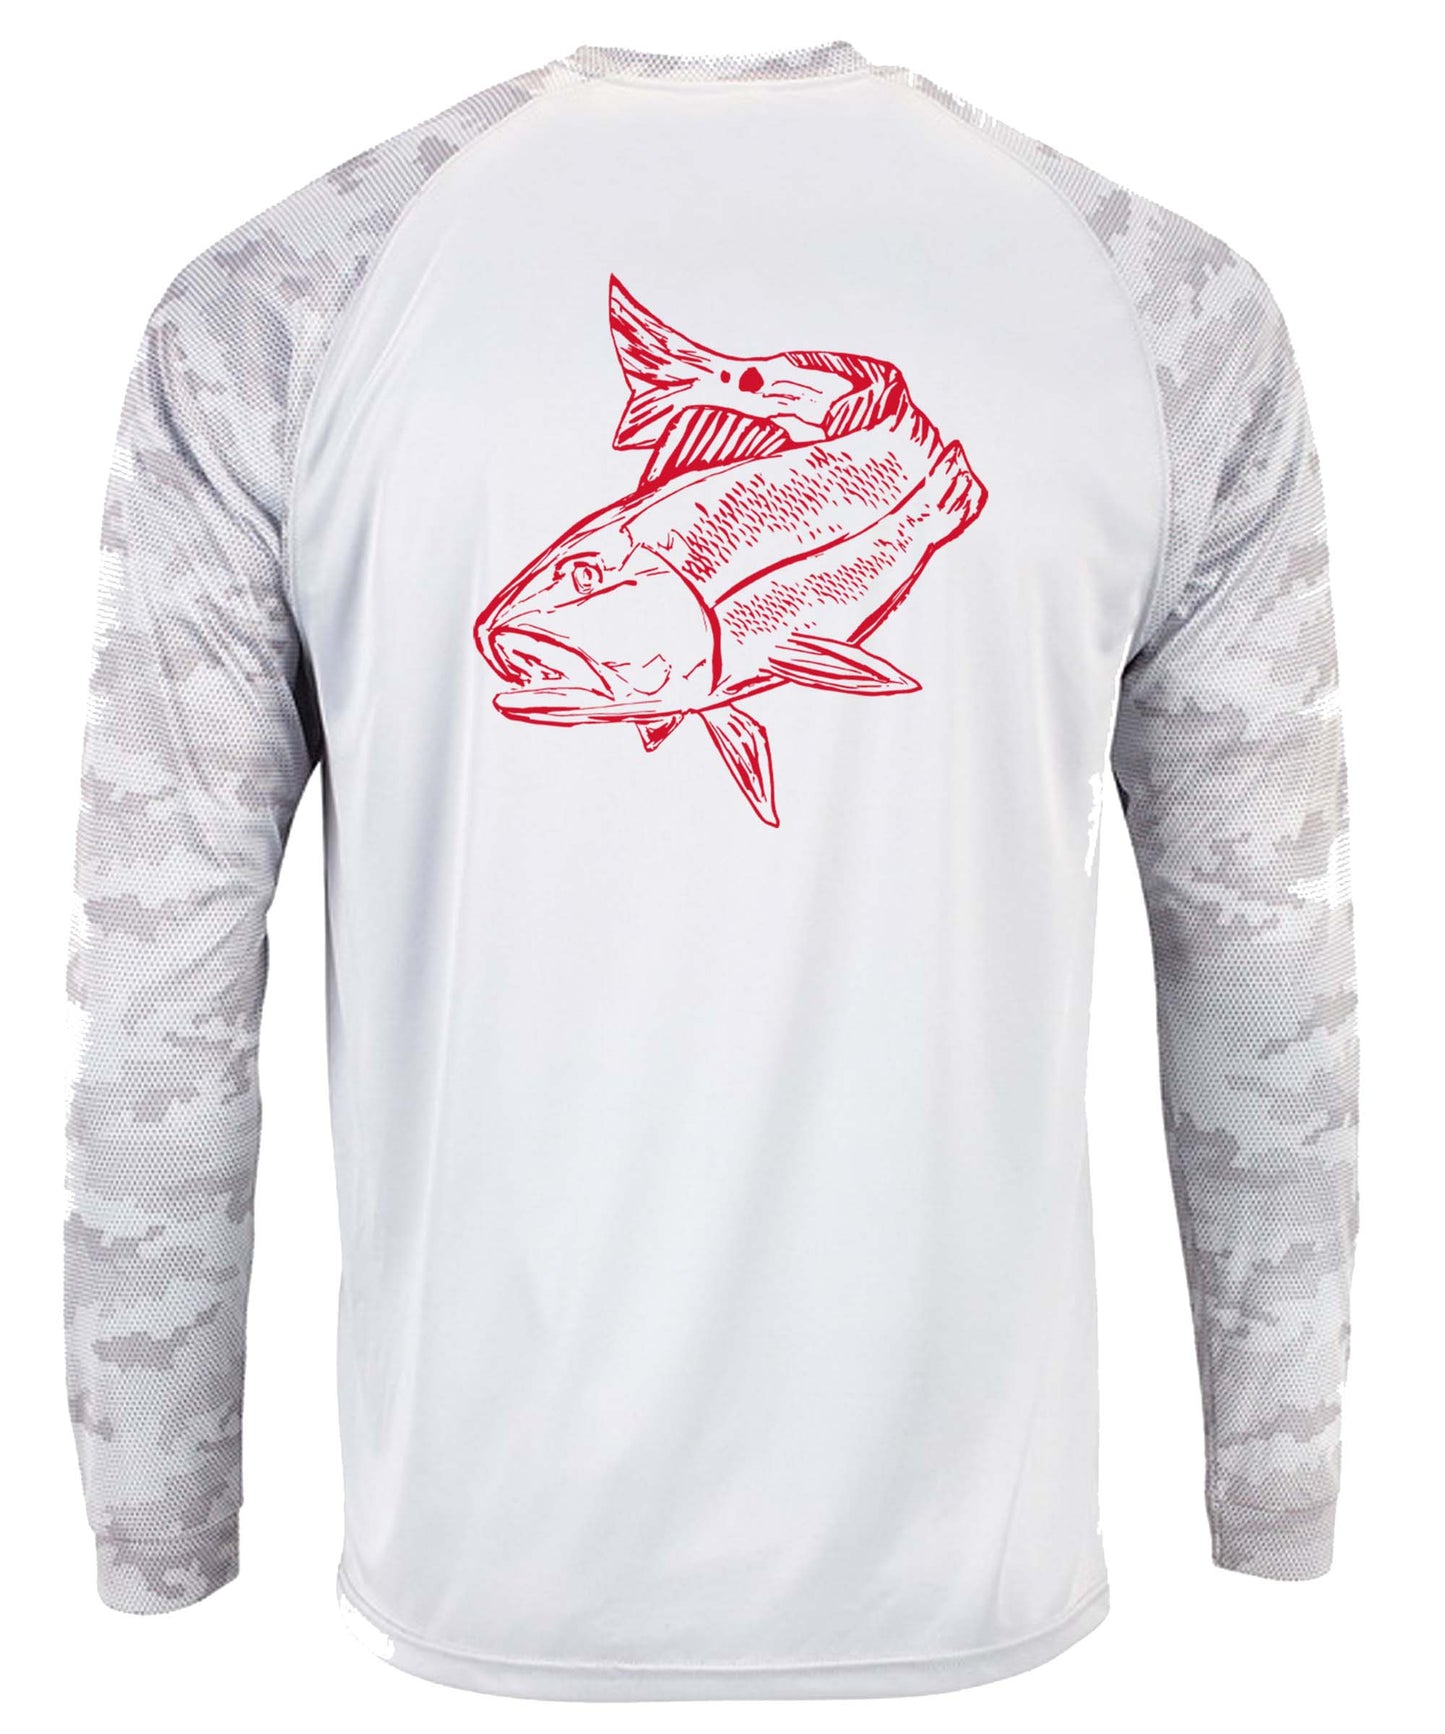 Redfish Performance Dry-Fit Fishing shirts with Sun Protection - White Digital Camo Long Sleeve